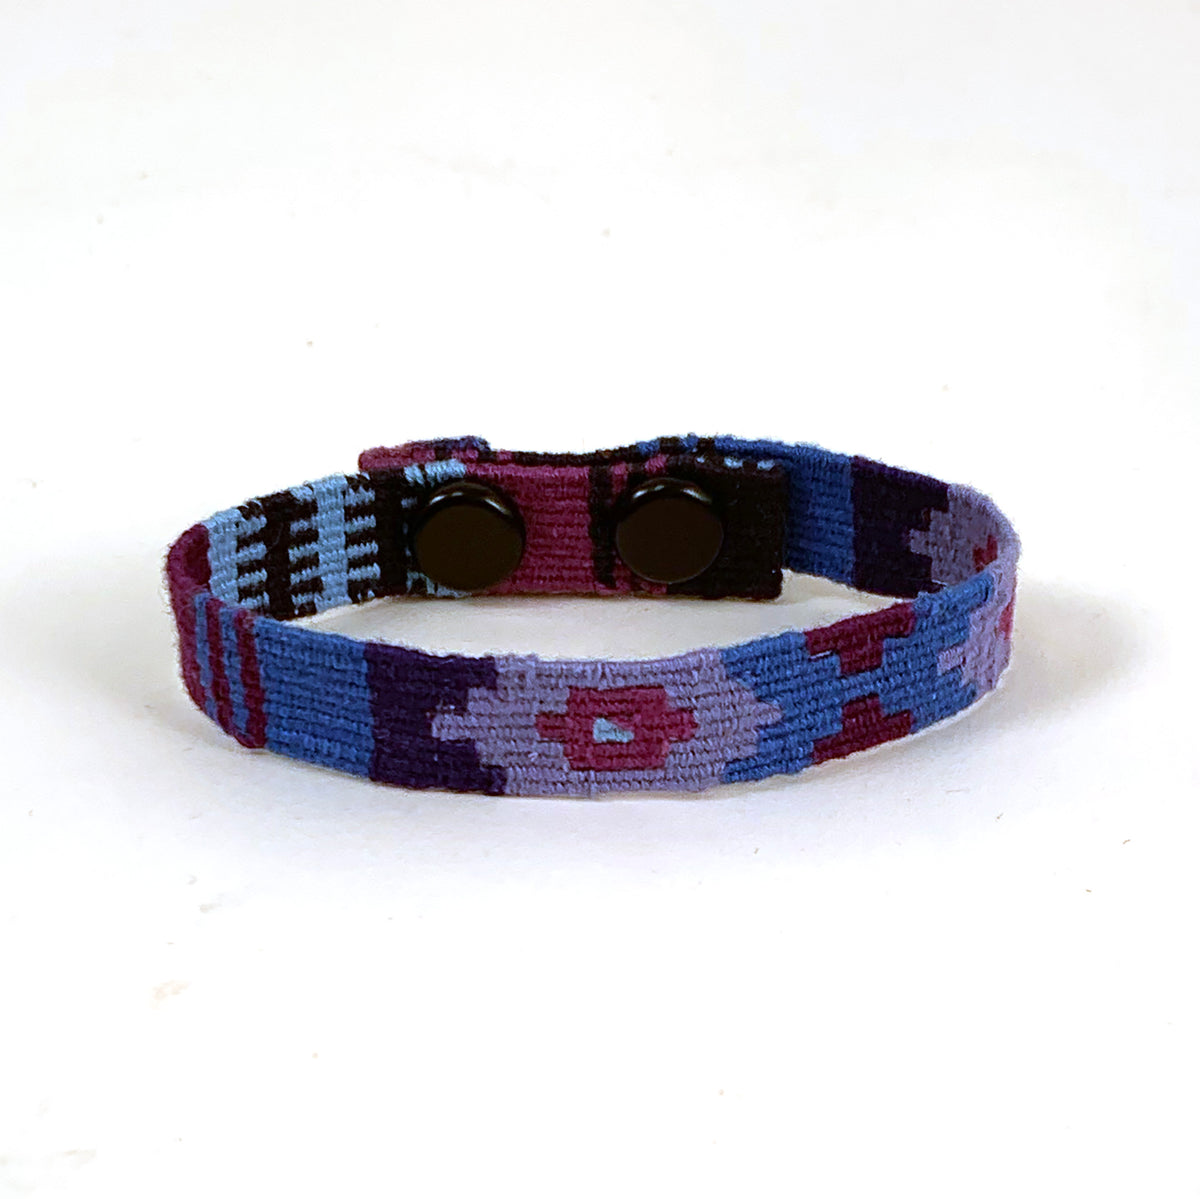 handwoven friendship bracelet with snaps - blue and purple